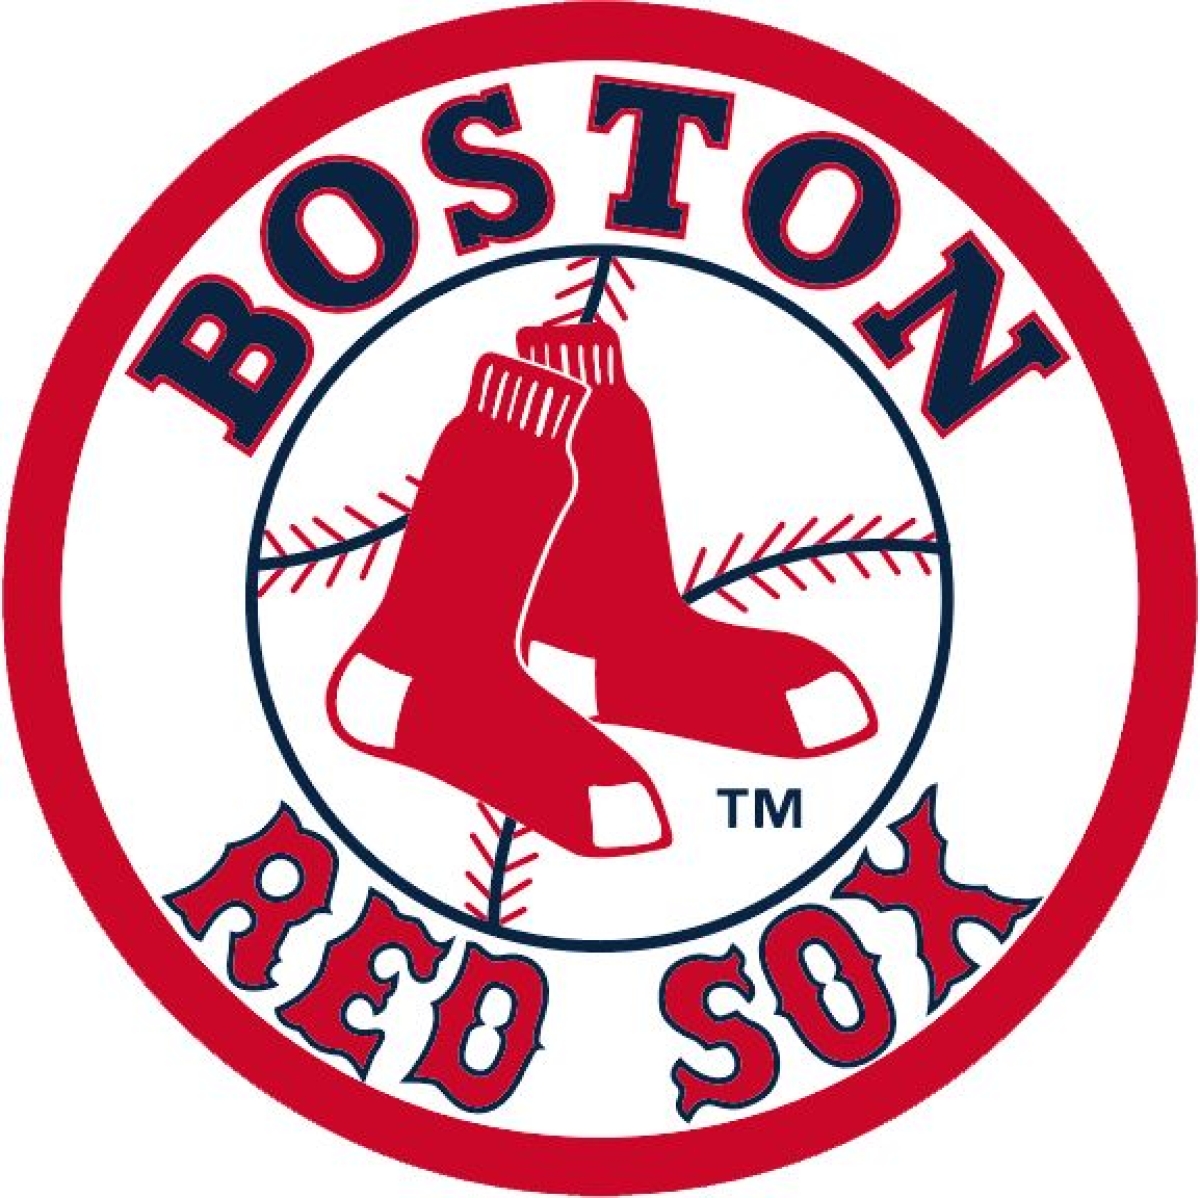 Boston Red Sox release revised schedule for 2022 season